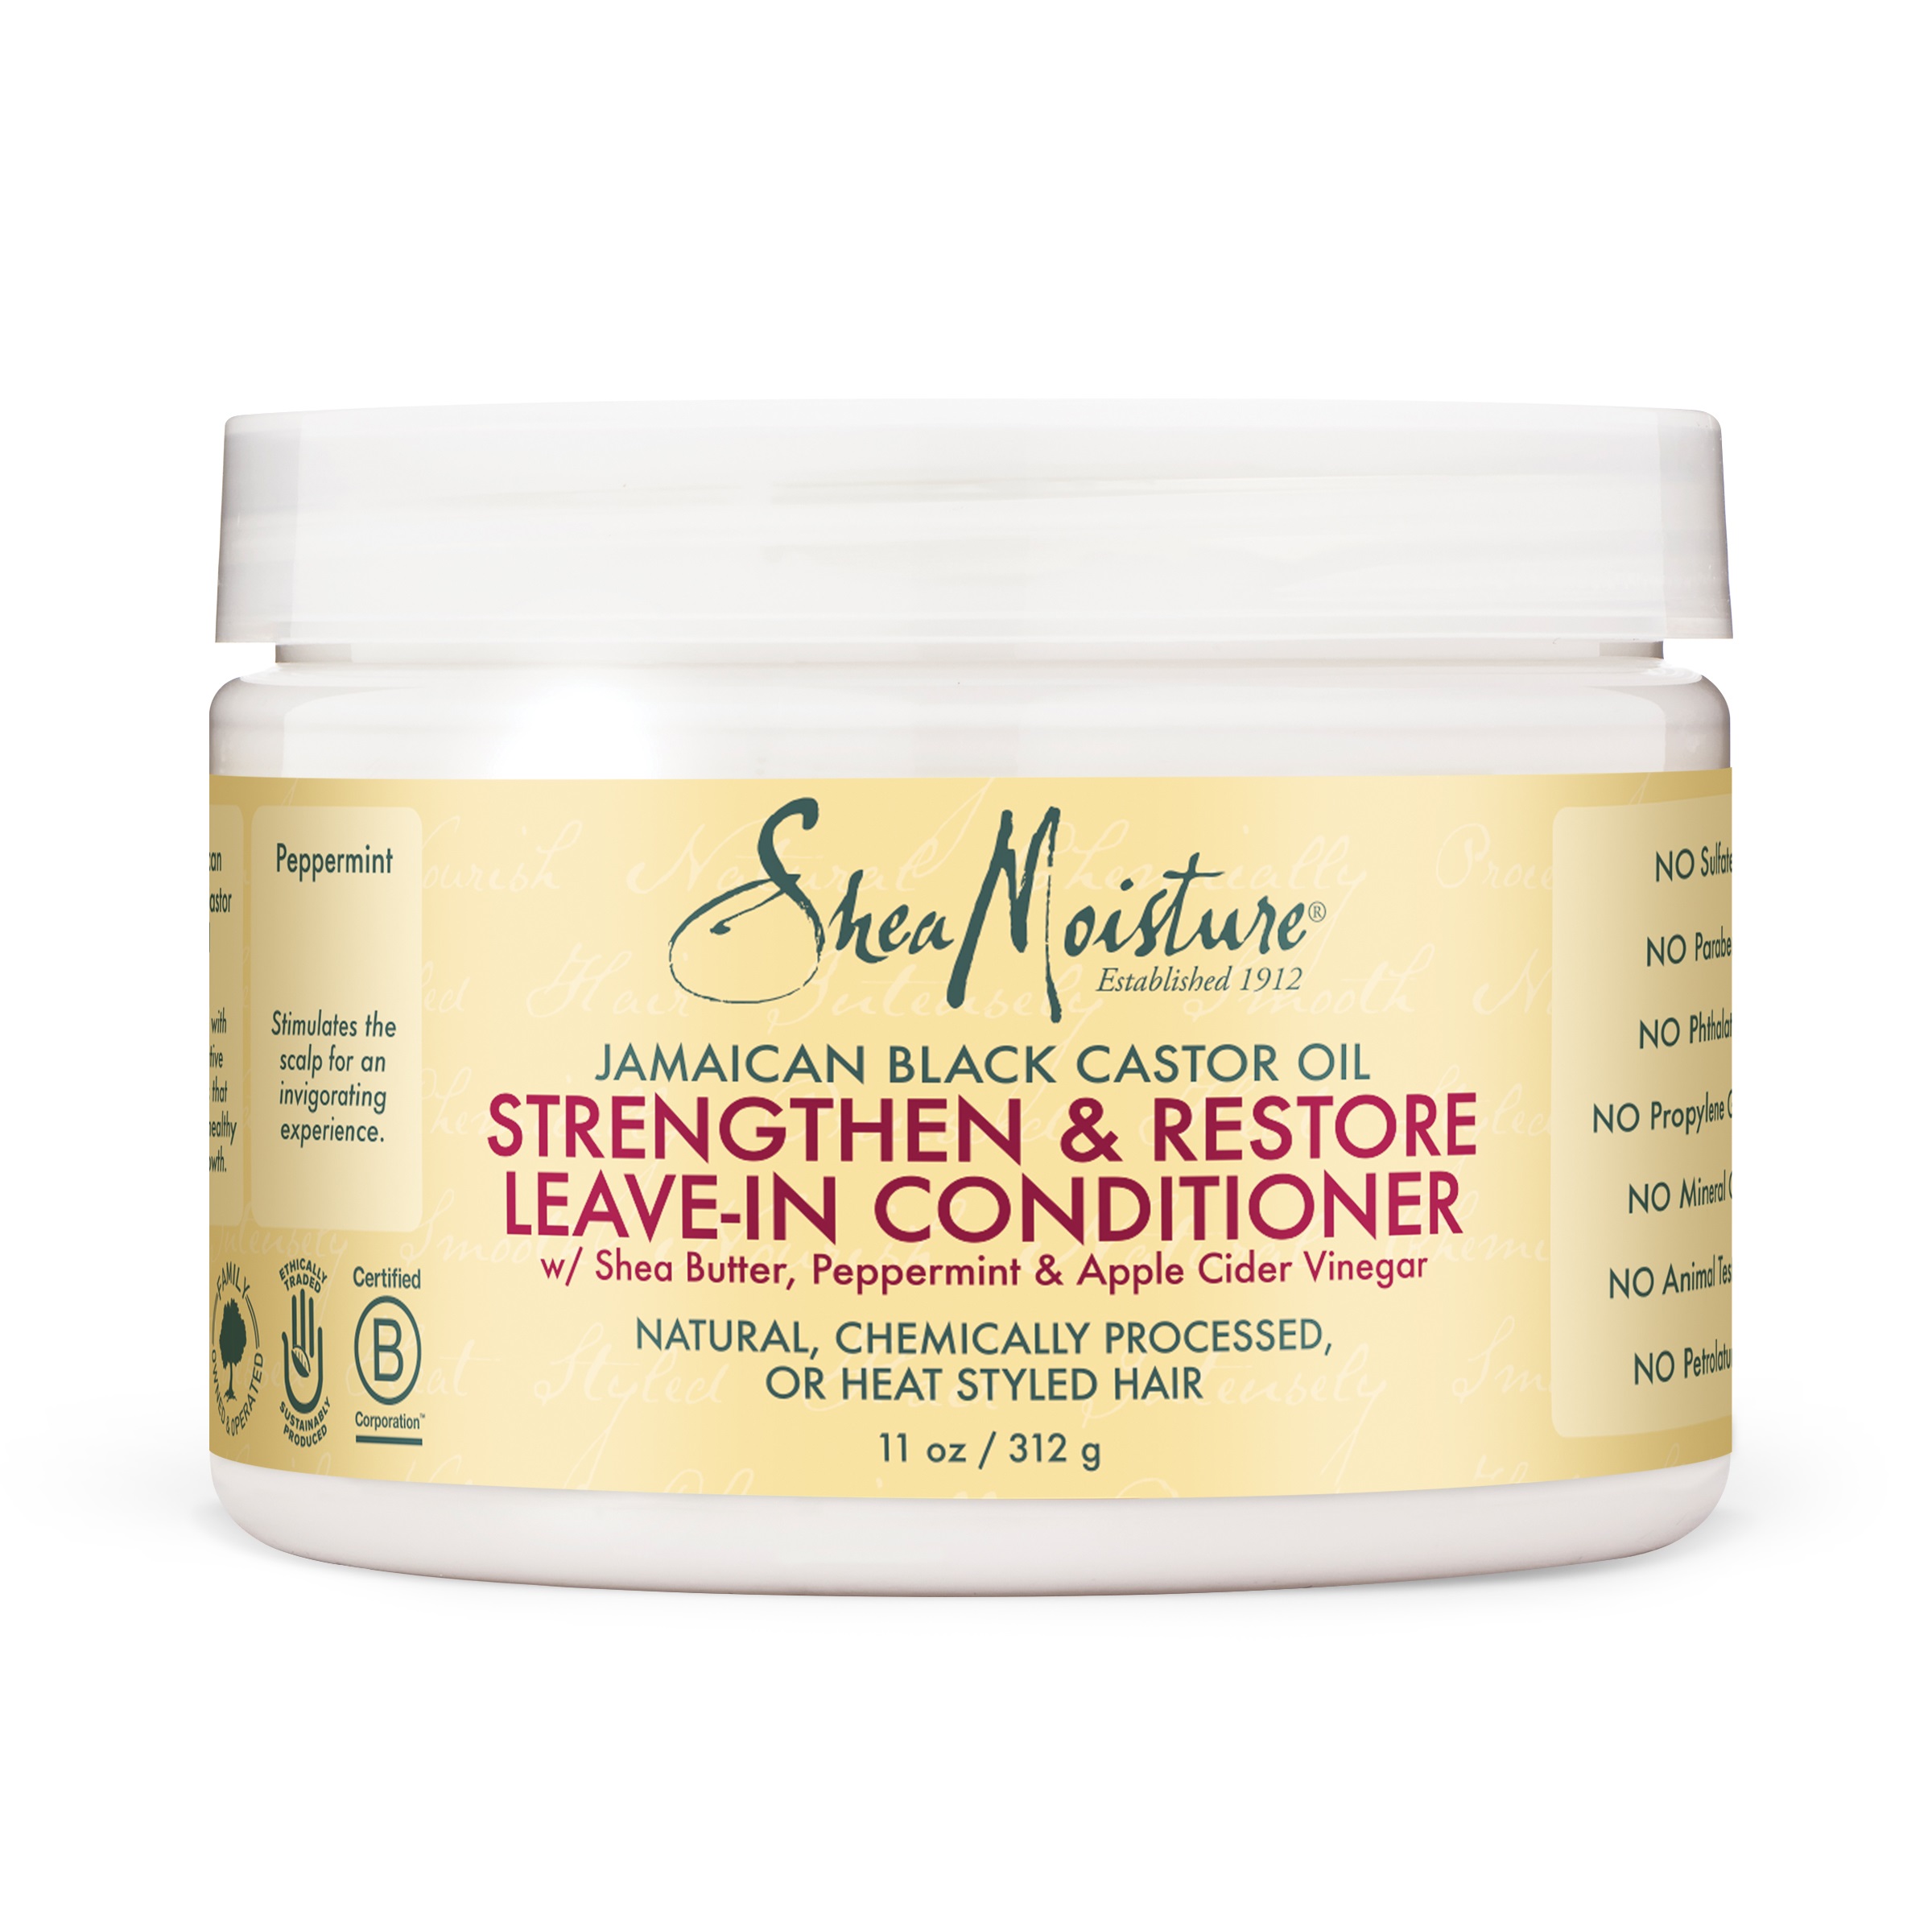 Shea Moisture Jamaican Black Castor Oil Strengthen and Restore Leave-in Conditioner